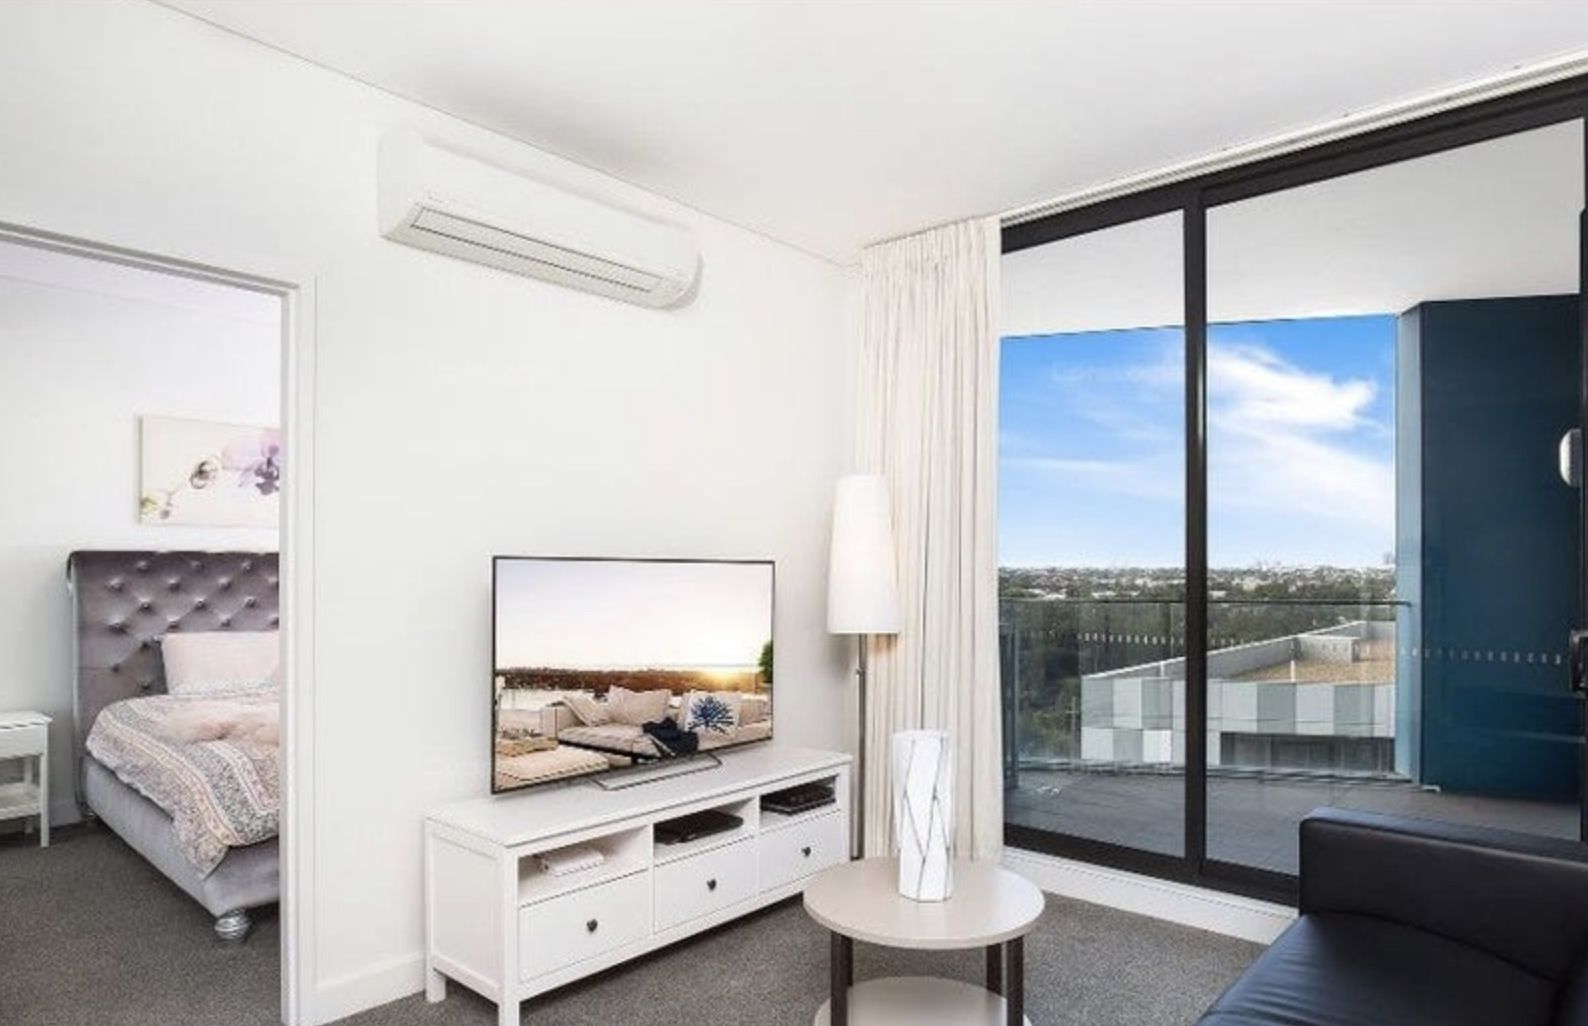 2 bedrooms Apartment / Unit / Flat in 1003/7 Magdalene Terrace WOLLI CREEK NSW, 2205